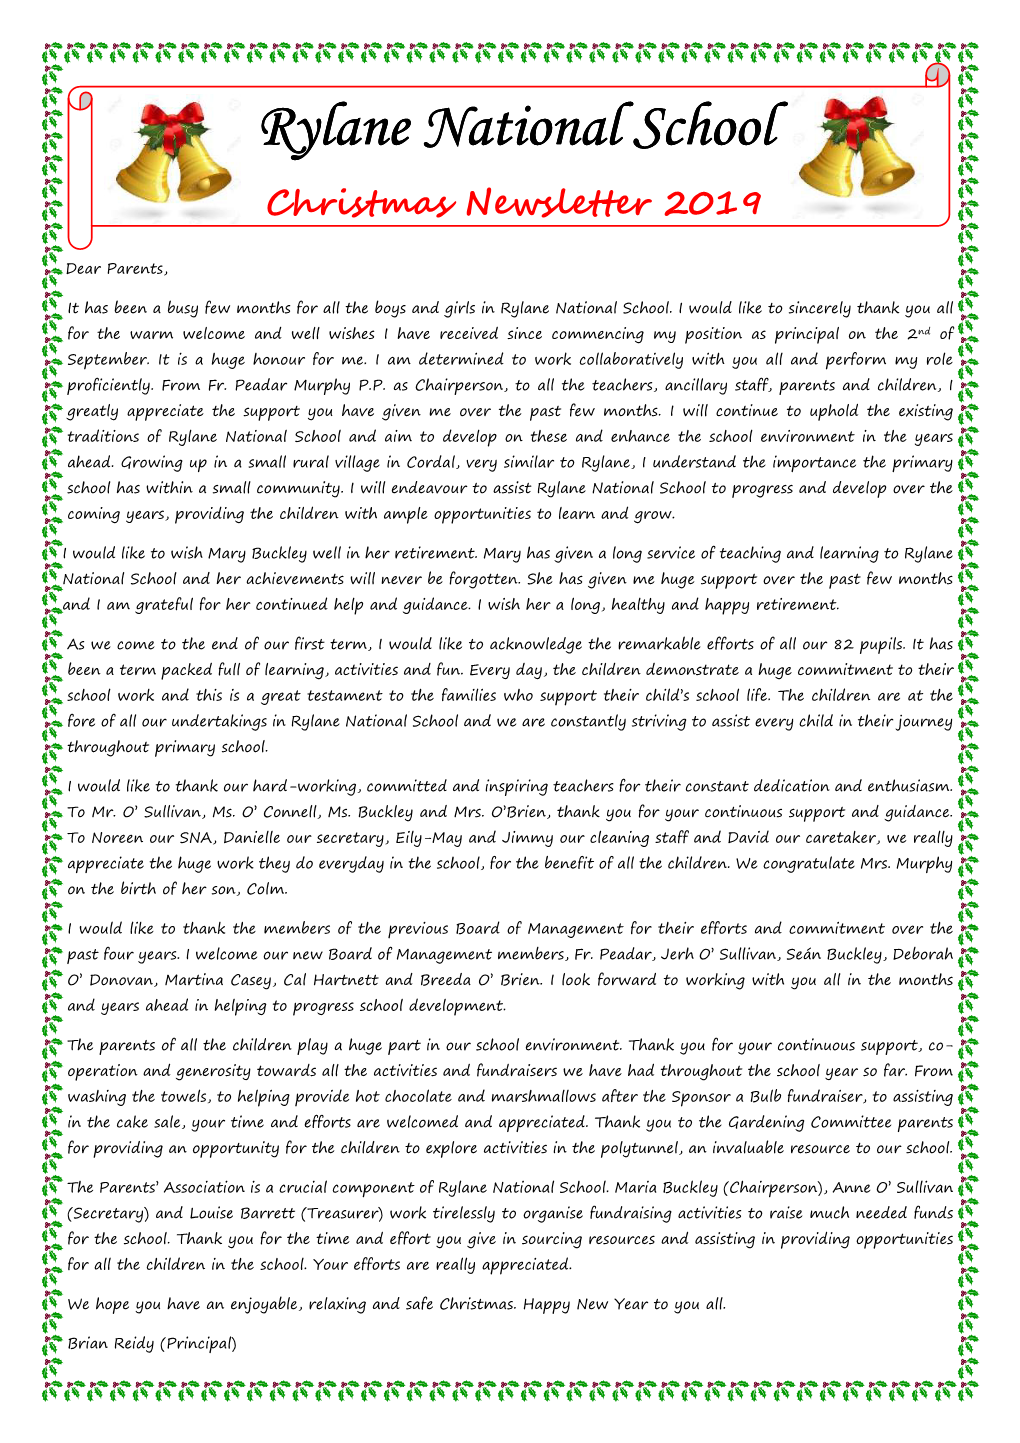 Download the Christmas Newsletter 2019